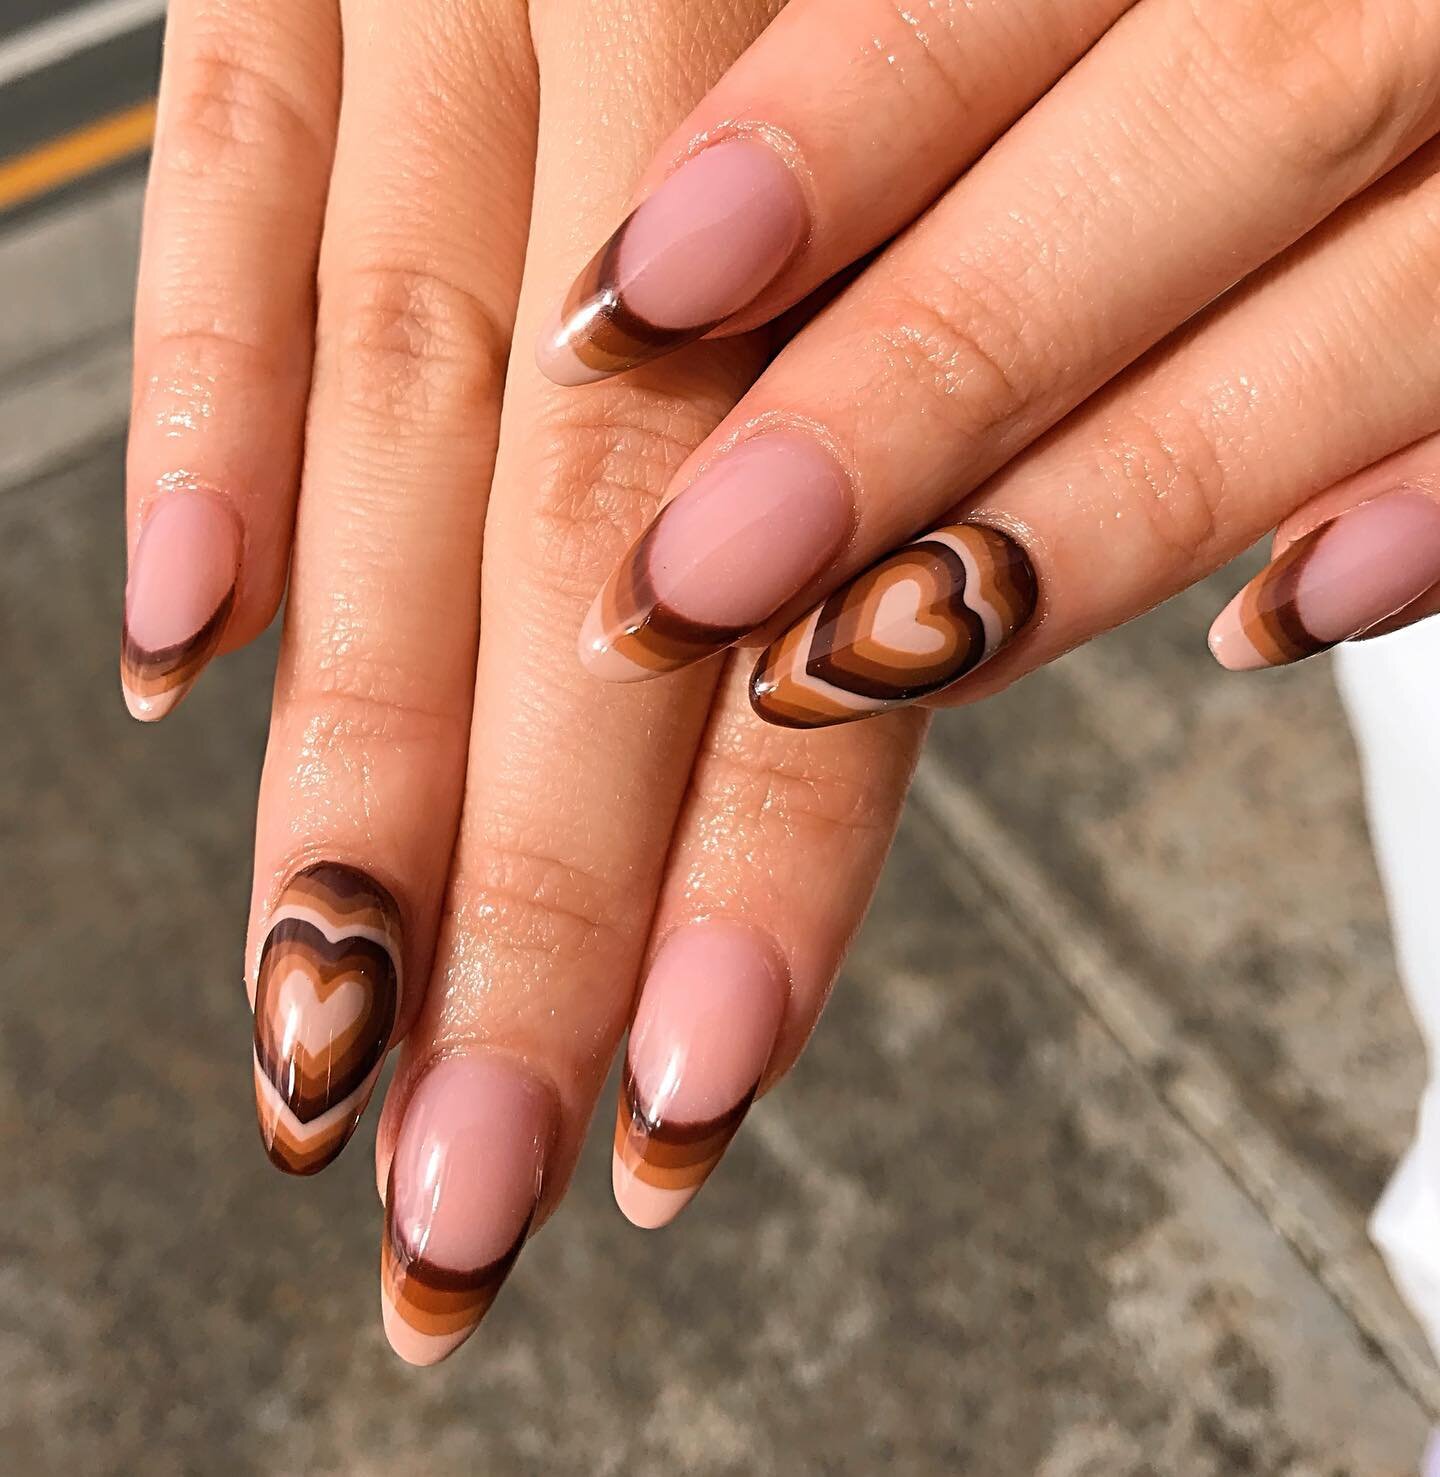 Chocolate hearts &hearts;️ 

Most sets we post on our page were done a few months prior! 
To see what we do every day watch our stories 👀 

Set of superior by Nicole ✨

For bookings text 0432 720 425 〰️

#adoredollsparlour #getnailedright